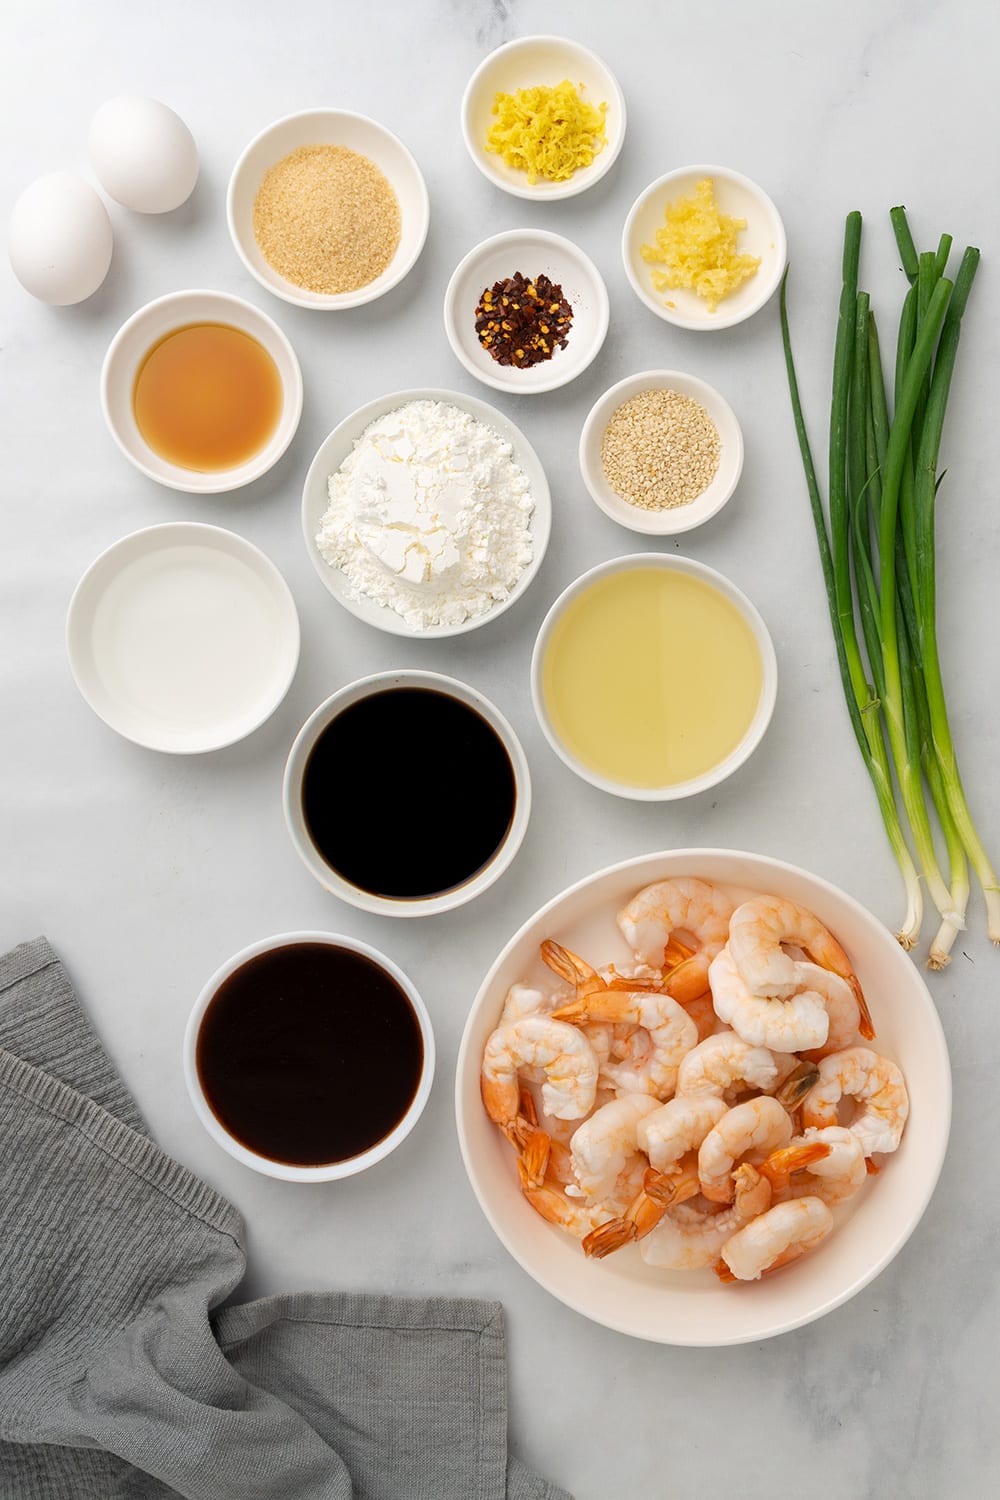 Ingredients for Mongolia shrimp and sauce